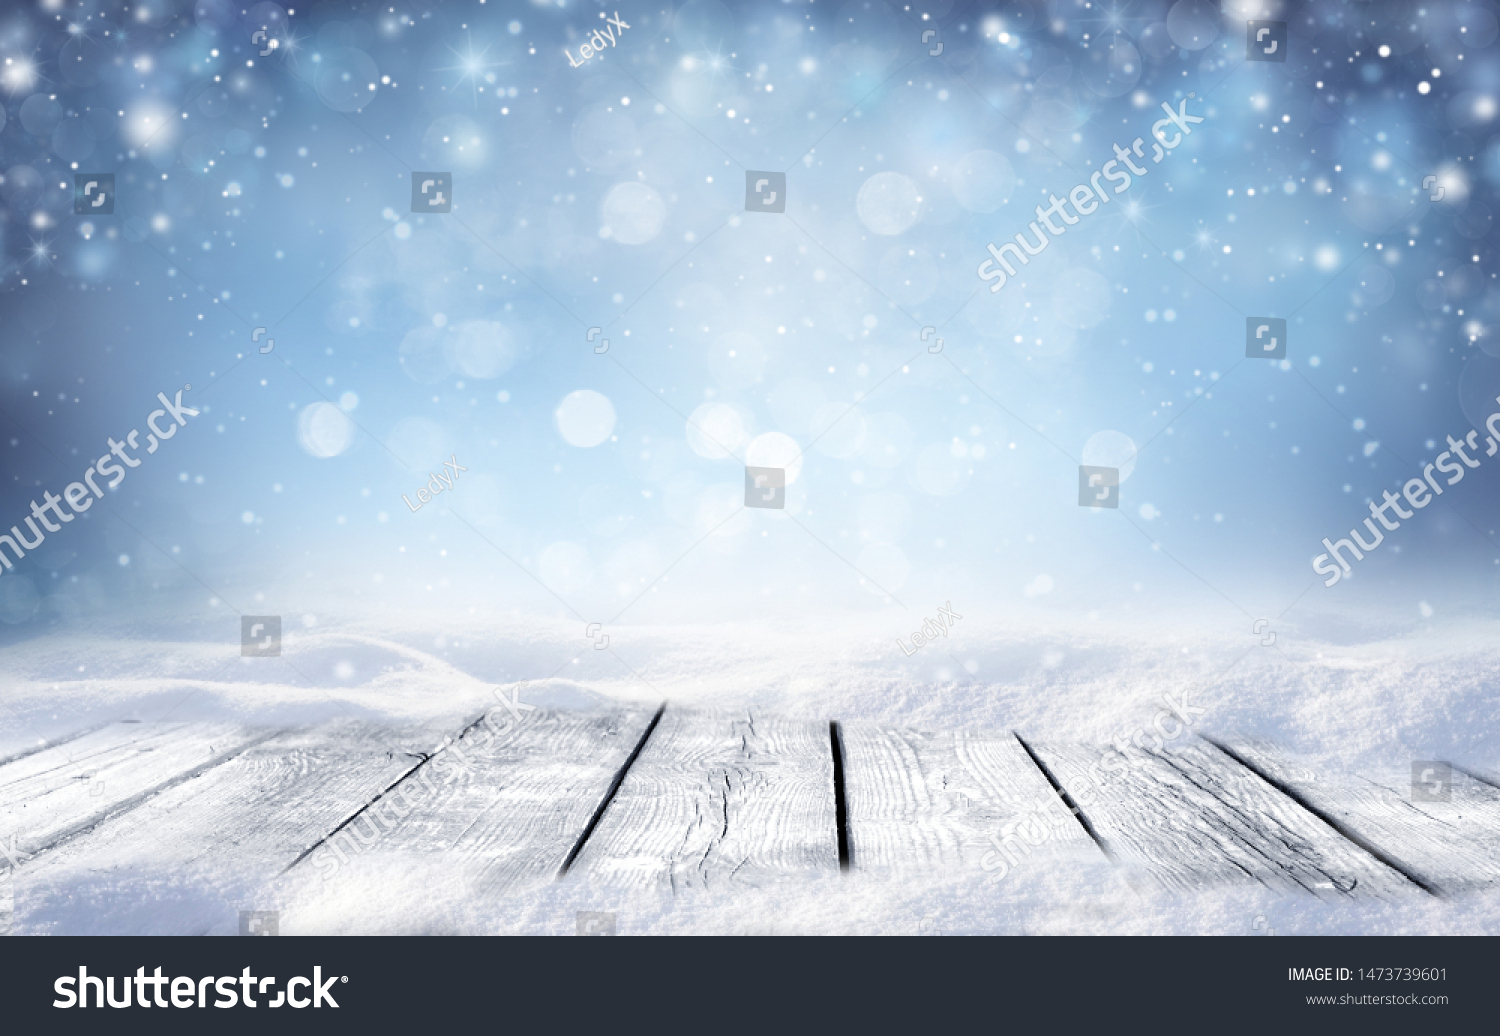 Beautiful winter snowy blurred defocused blue background and empty wooden flooring. Flakes of snow fall and sparkle on light, copy space. #1473739601